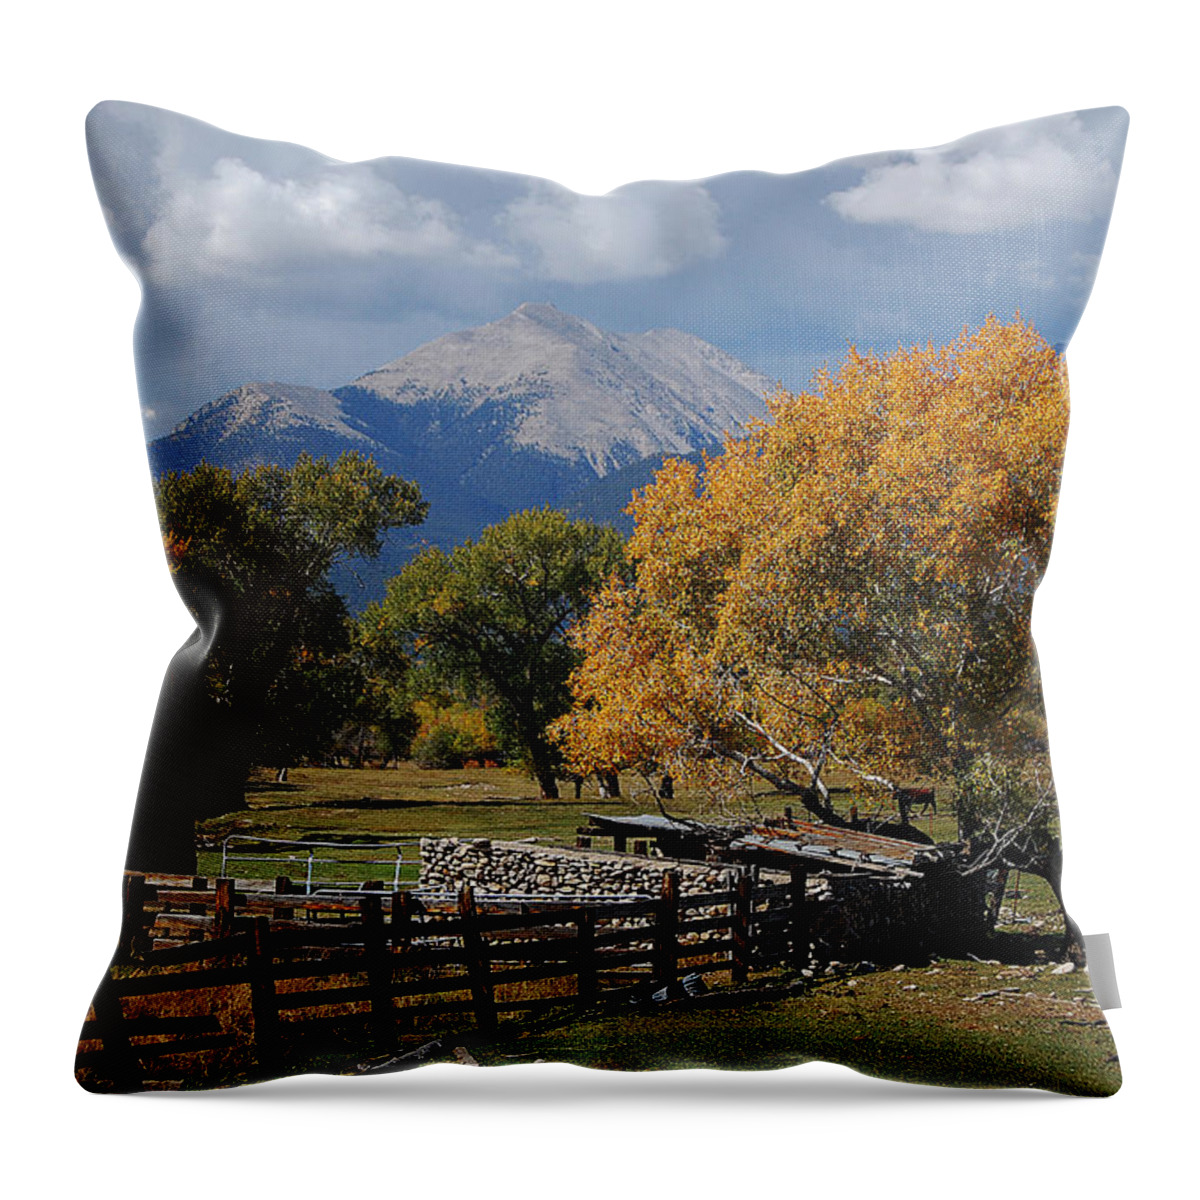 Range Throw Pillow featuring the photograph Front Range Homestead by Steve Marler